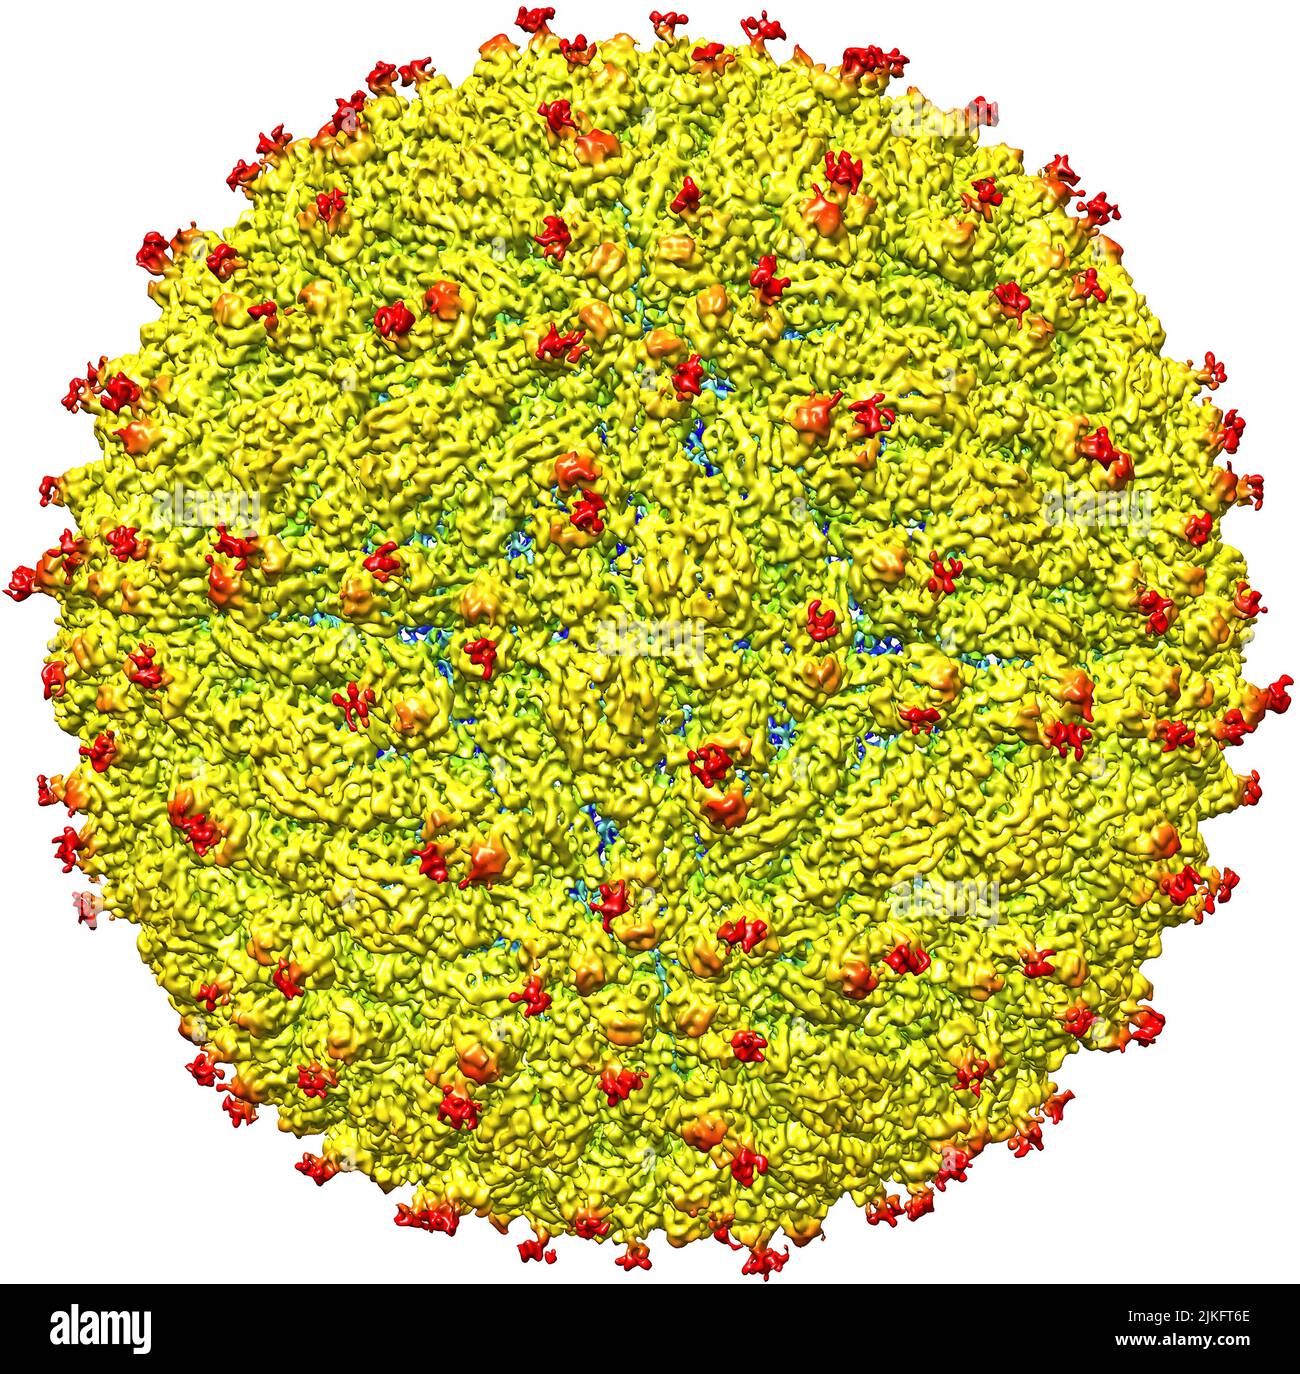 A representation of the Zika virus surface with protruding envelope glycoproteins (red) shown. A team led by Purdue University researchers is the first to determine the structure of the Zika virus, revealing information critical to the development of effective antiviral treatments and vaccines. Stock Photo